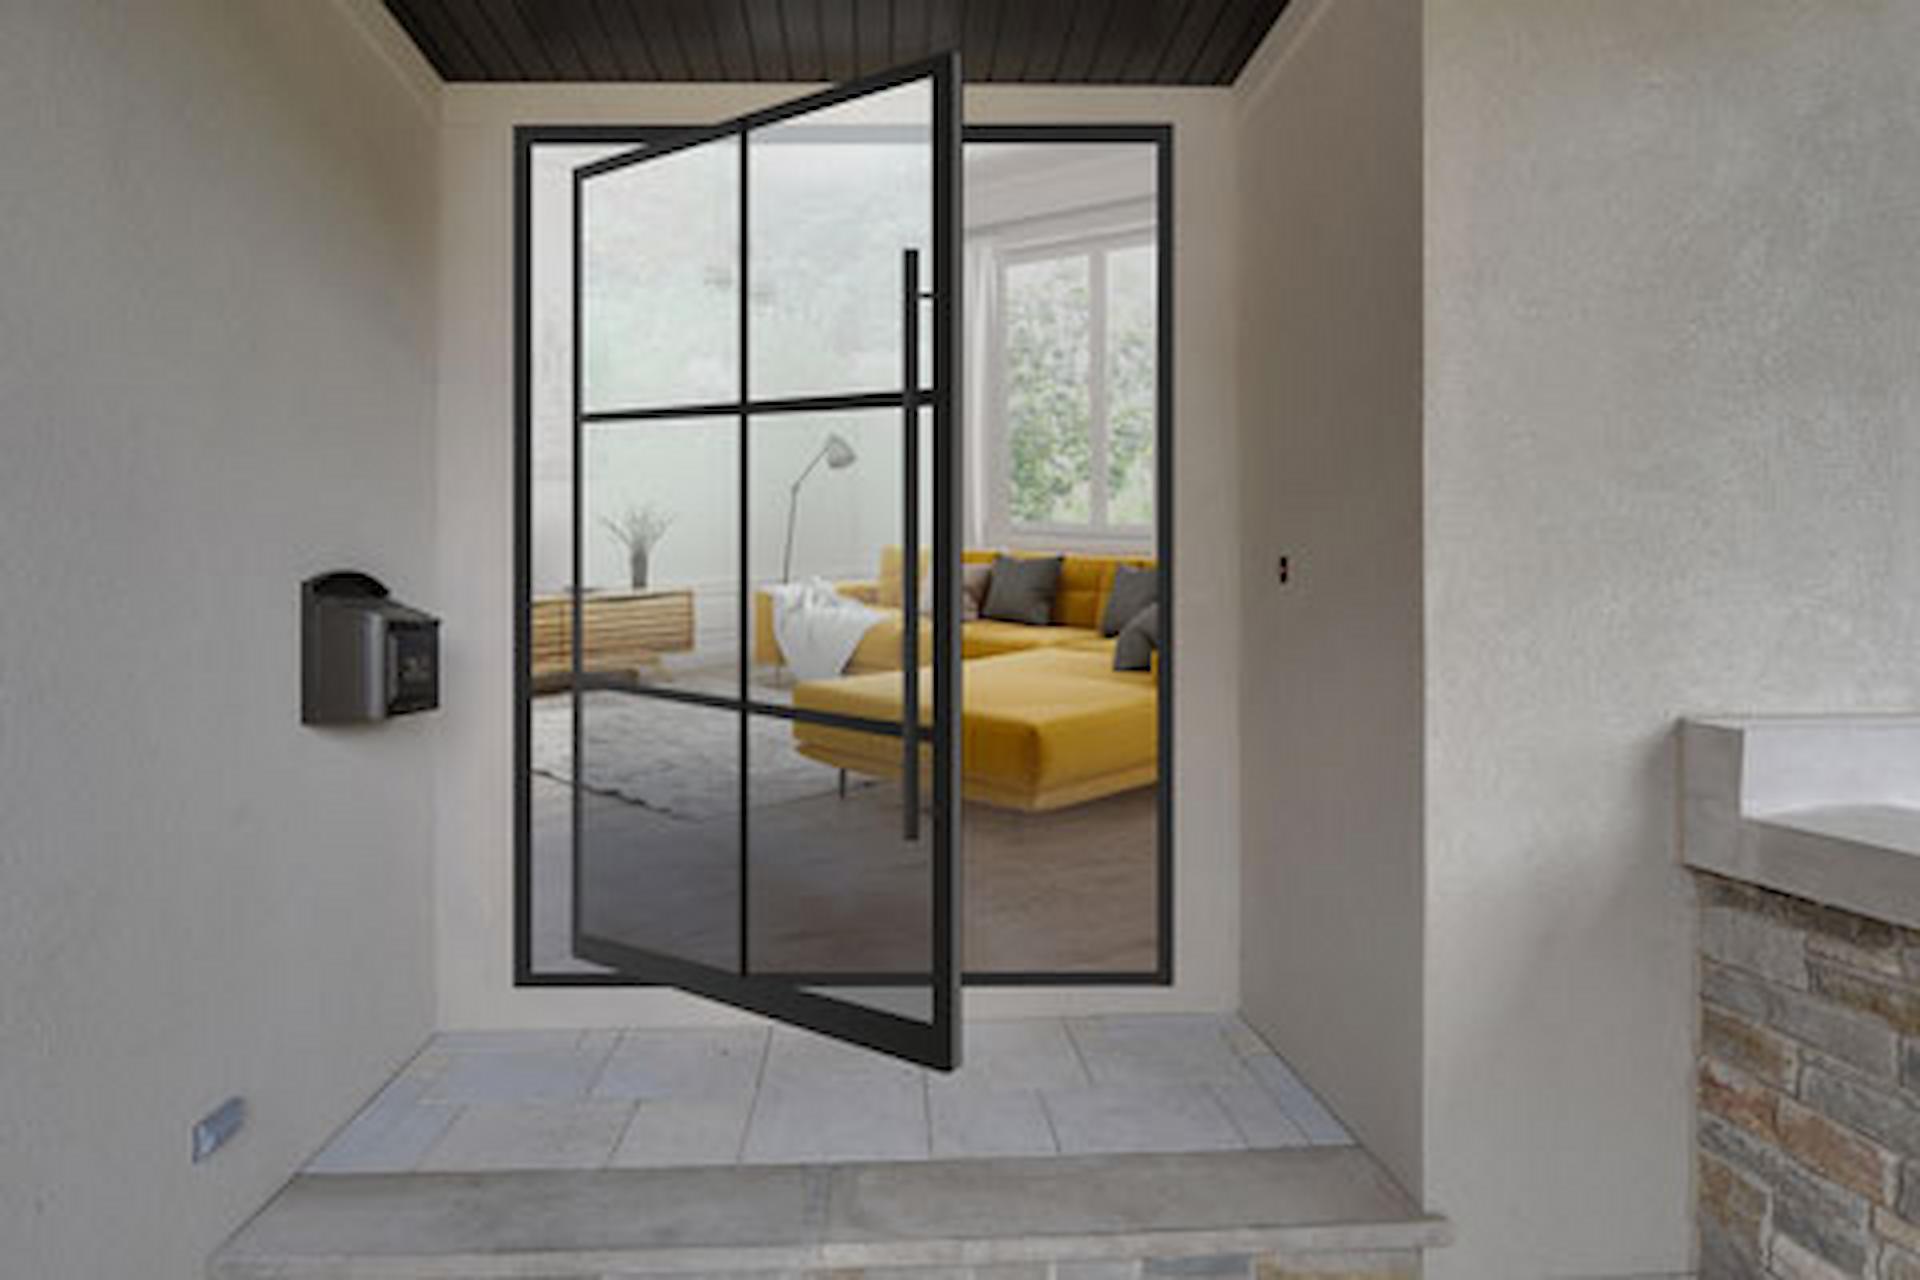 What Are Some Benefits Of Installing A Pivot Door At Your Place?